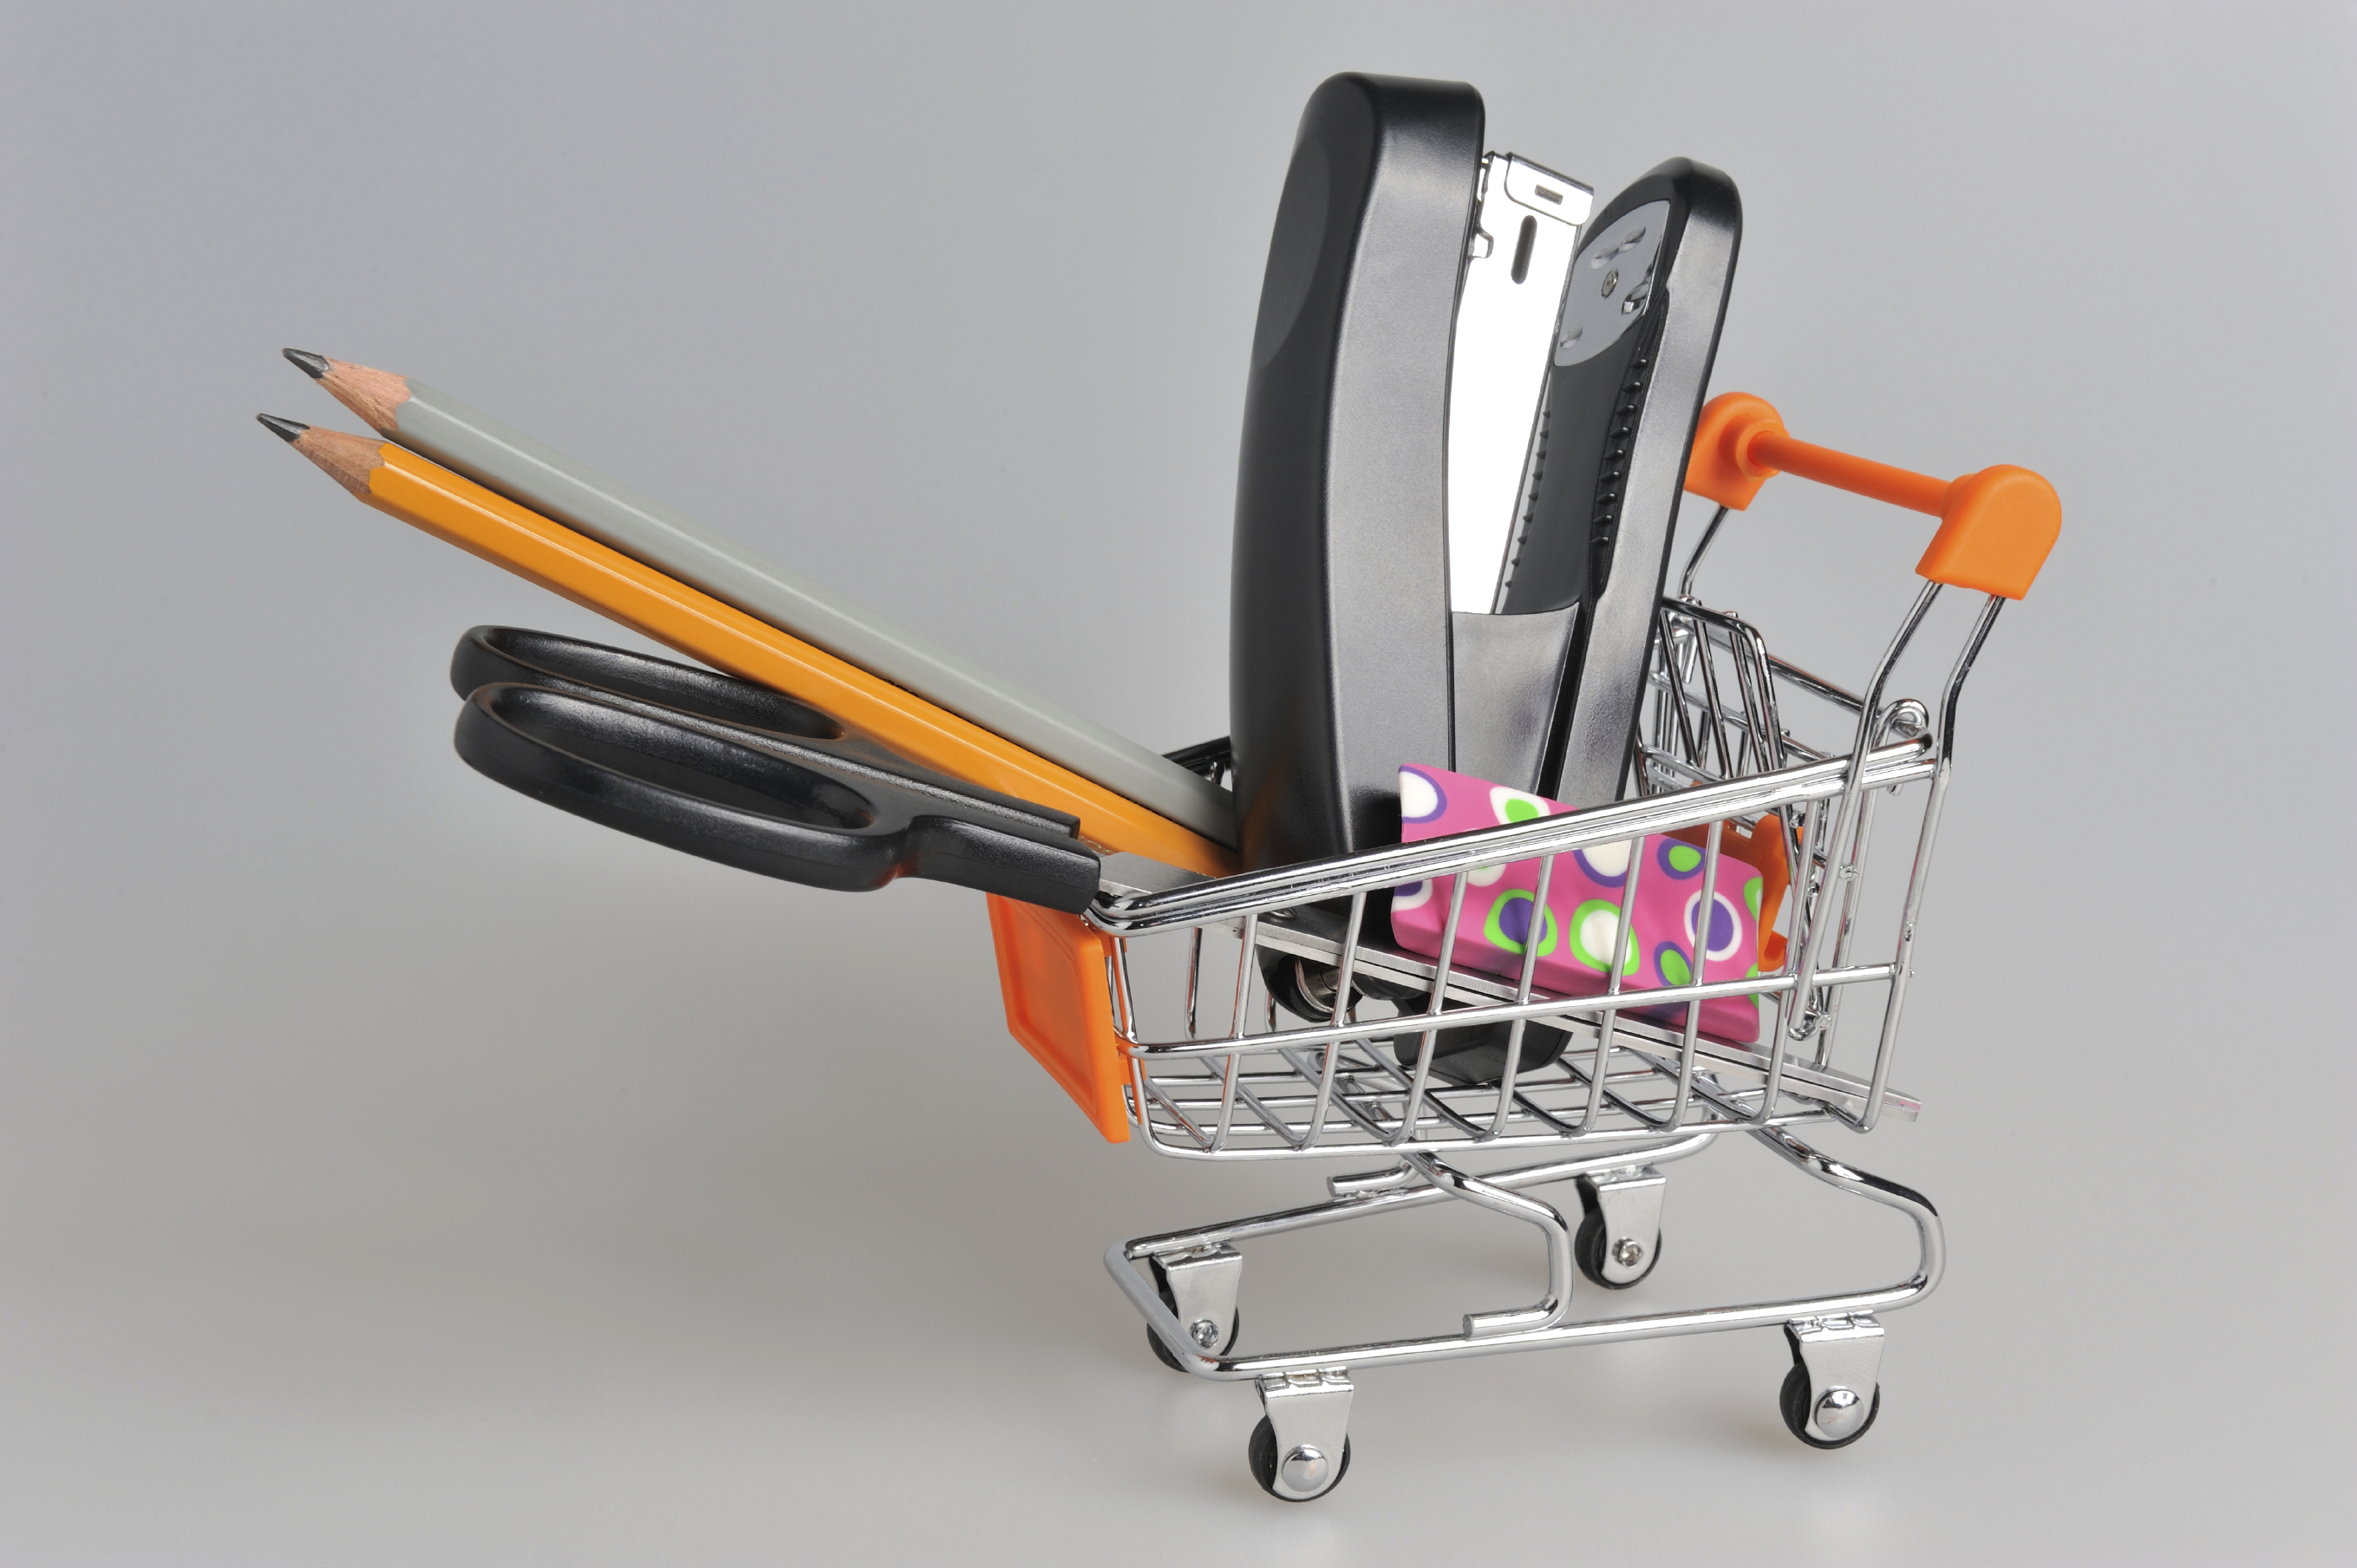 Shopping cart and stationery within on gray background